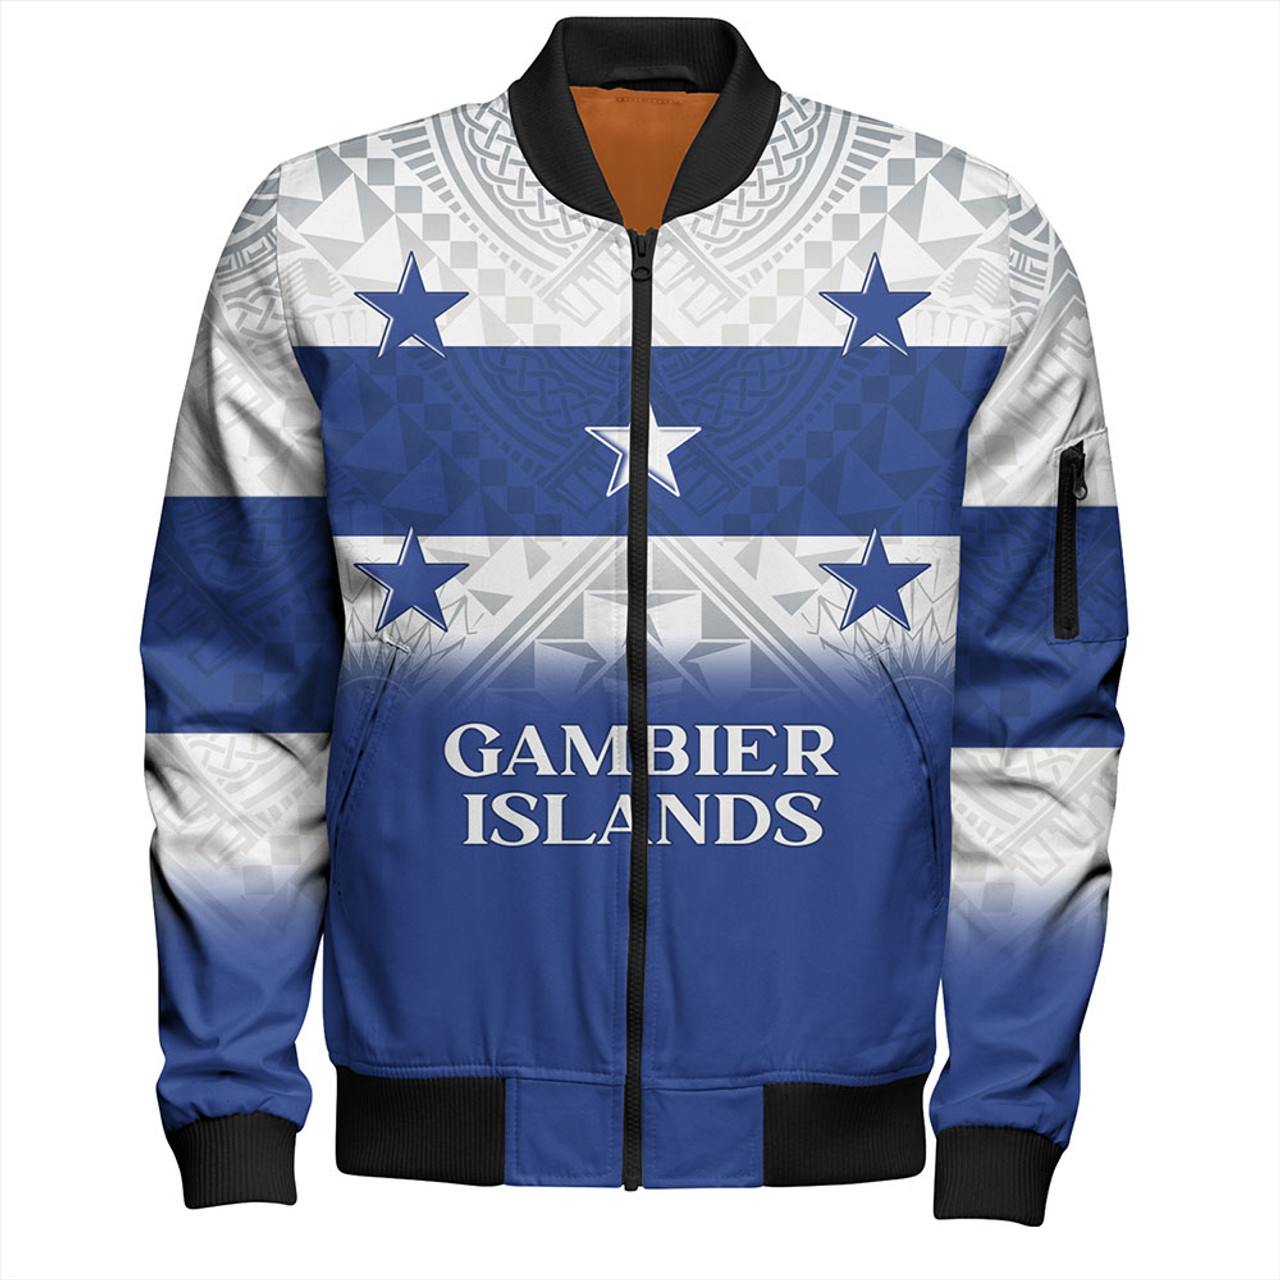 Gambier Islands Bomber Jacket Flag Color With Traditional Patterns